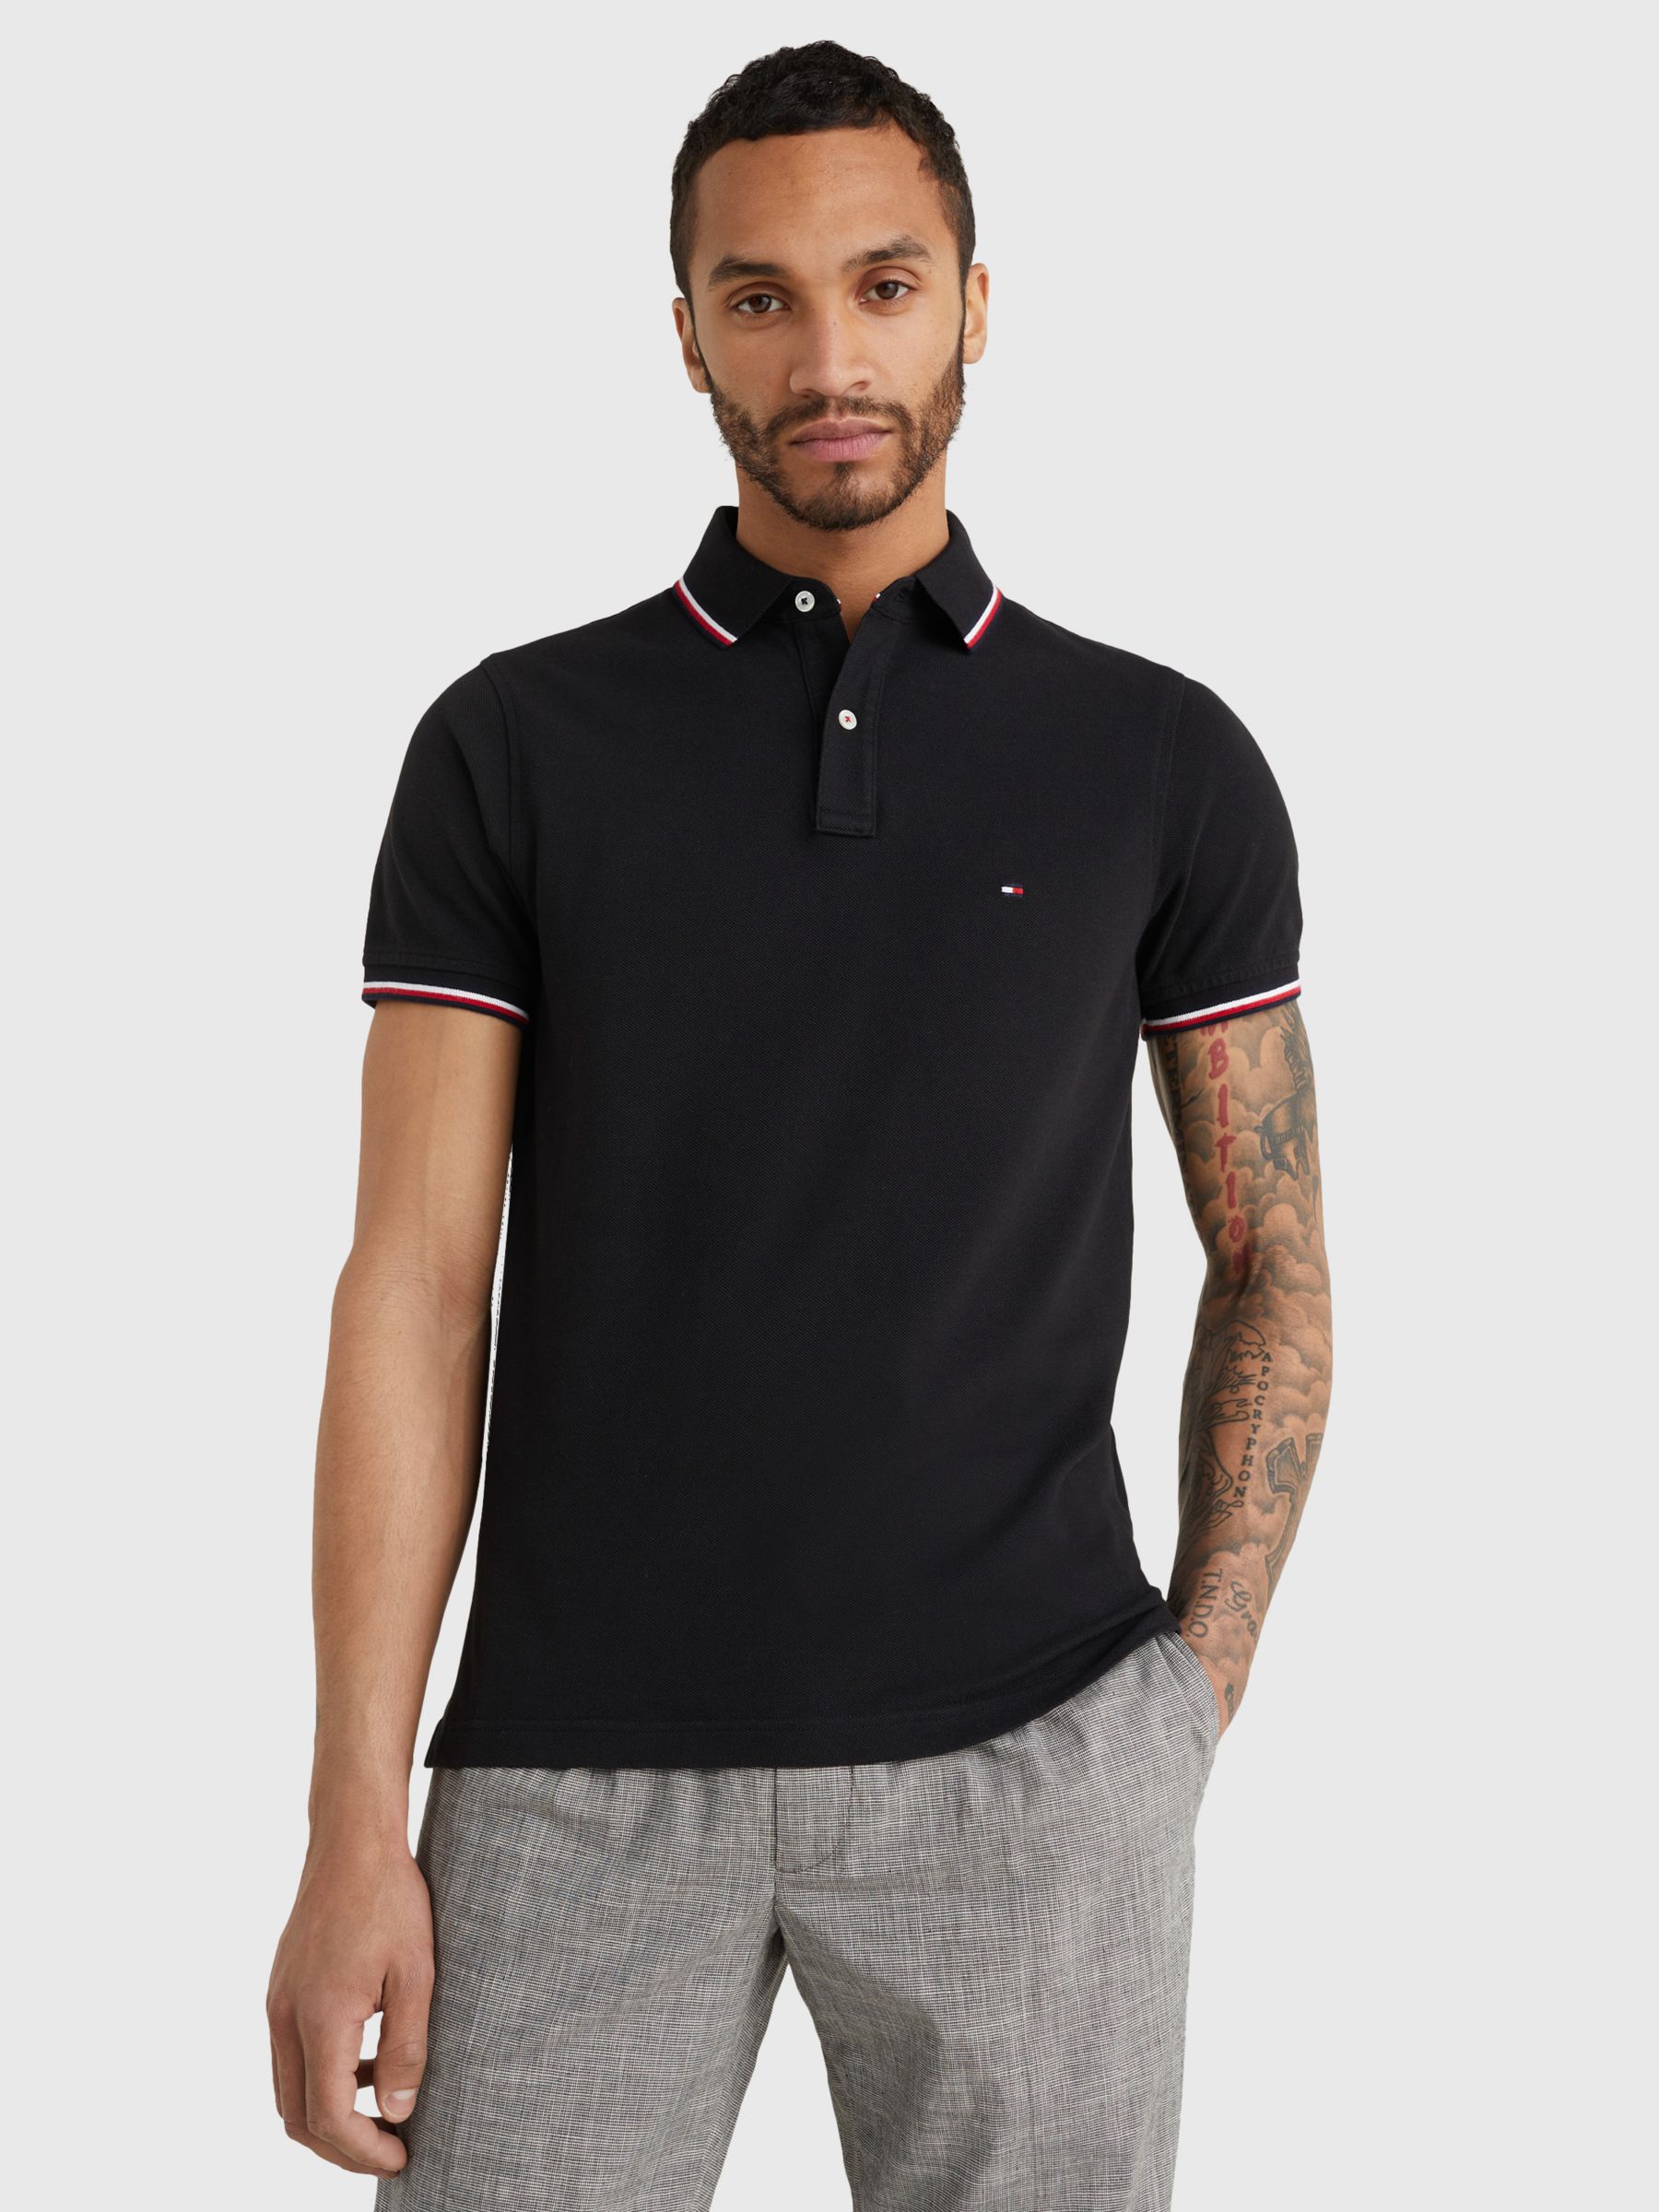 Tommy Hilfiger Tipped Organic Cotton Slim Fit Polo Shirt Black At John Lewis And Partners